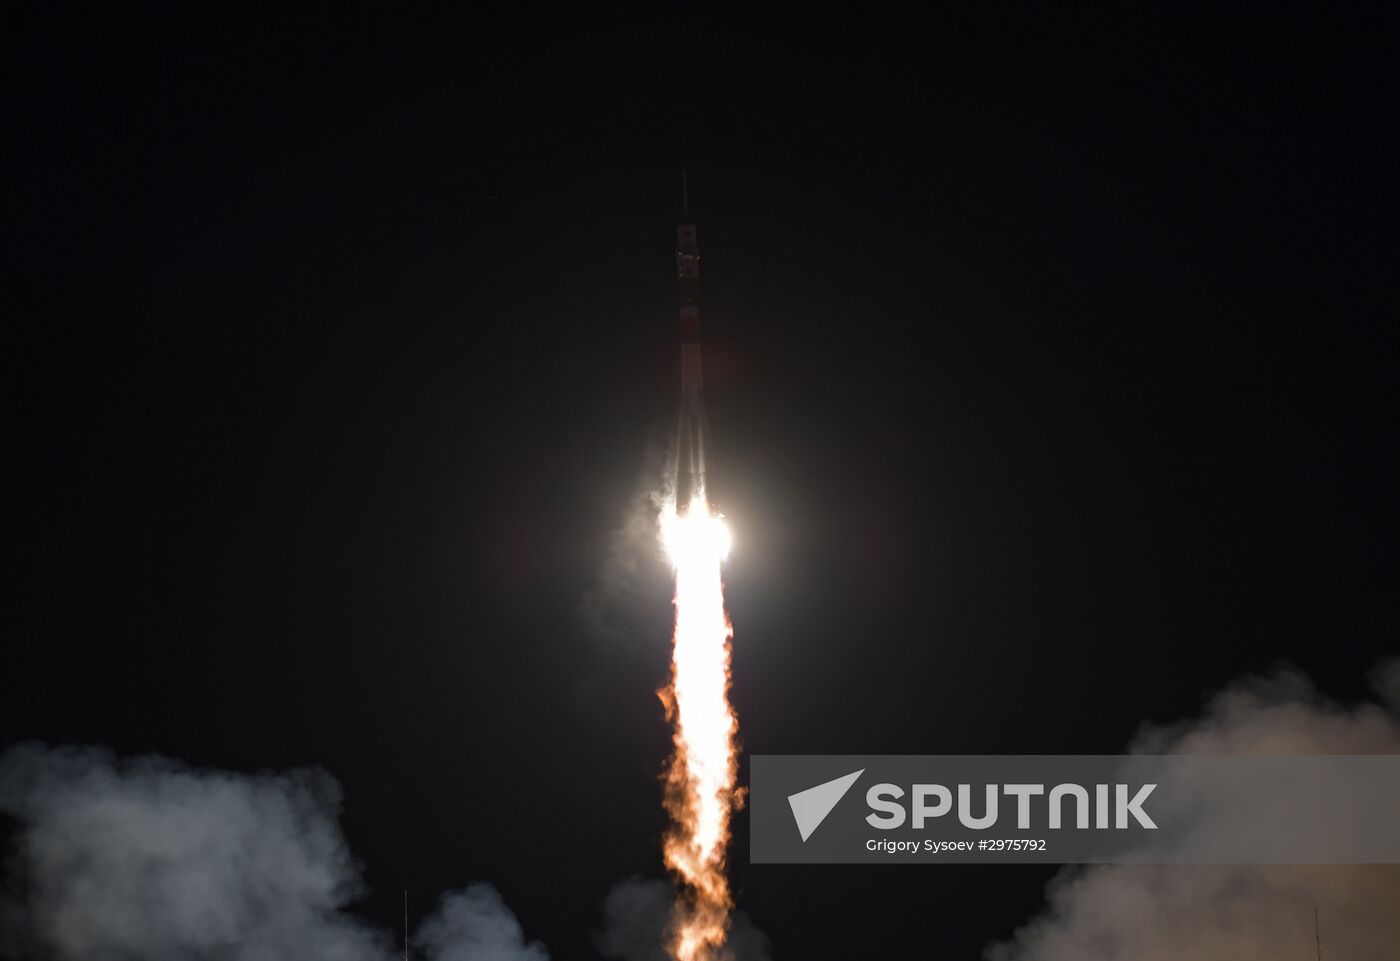 Launch of Soyuz-FG carrier rocket with manned spacecraft Soyuz MC-03 from the Baikonur Cosmodrome